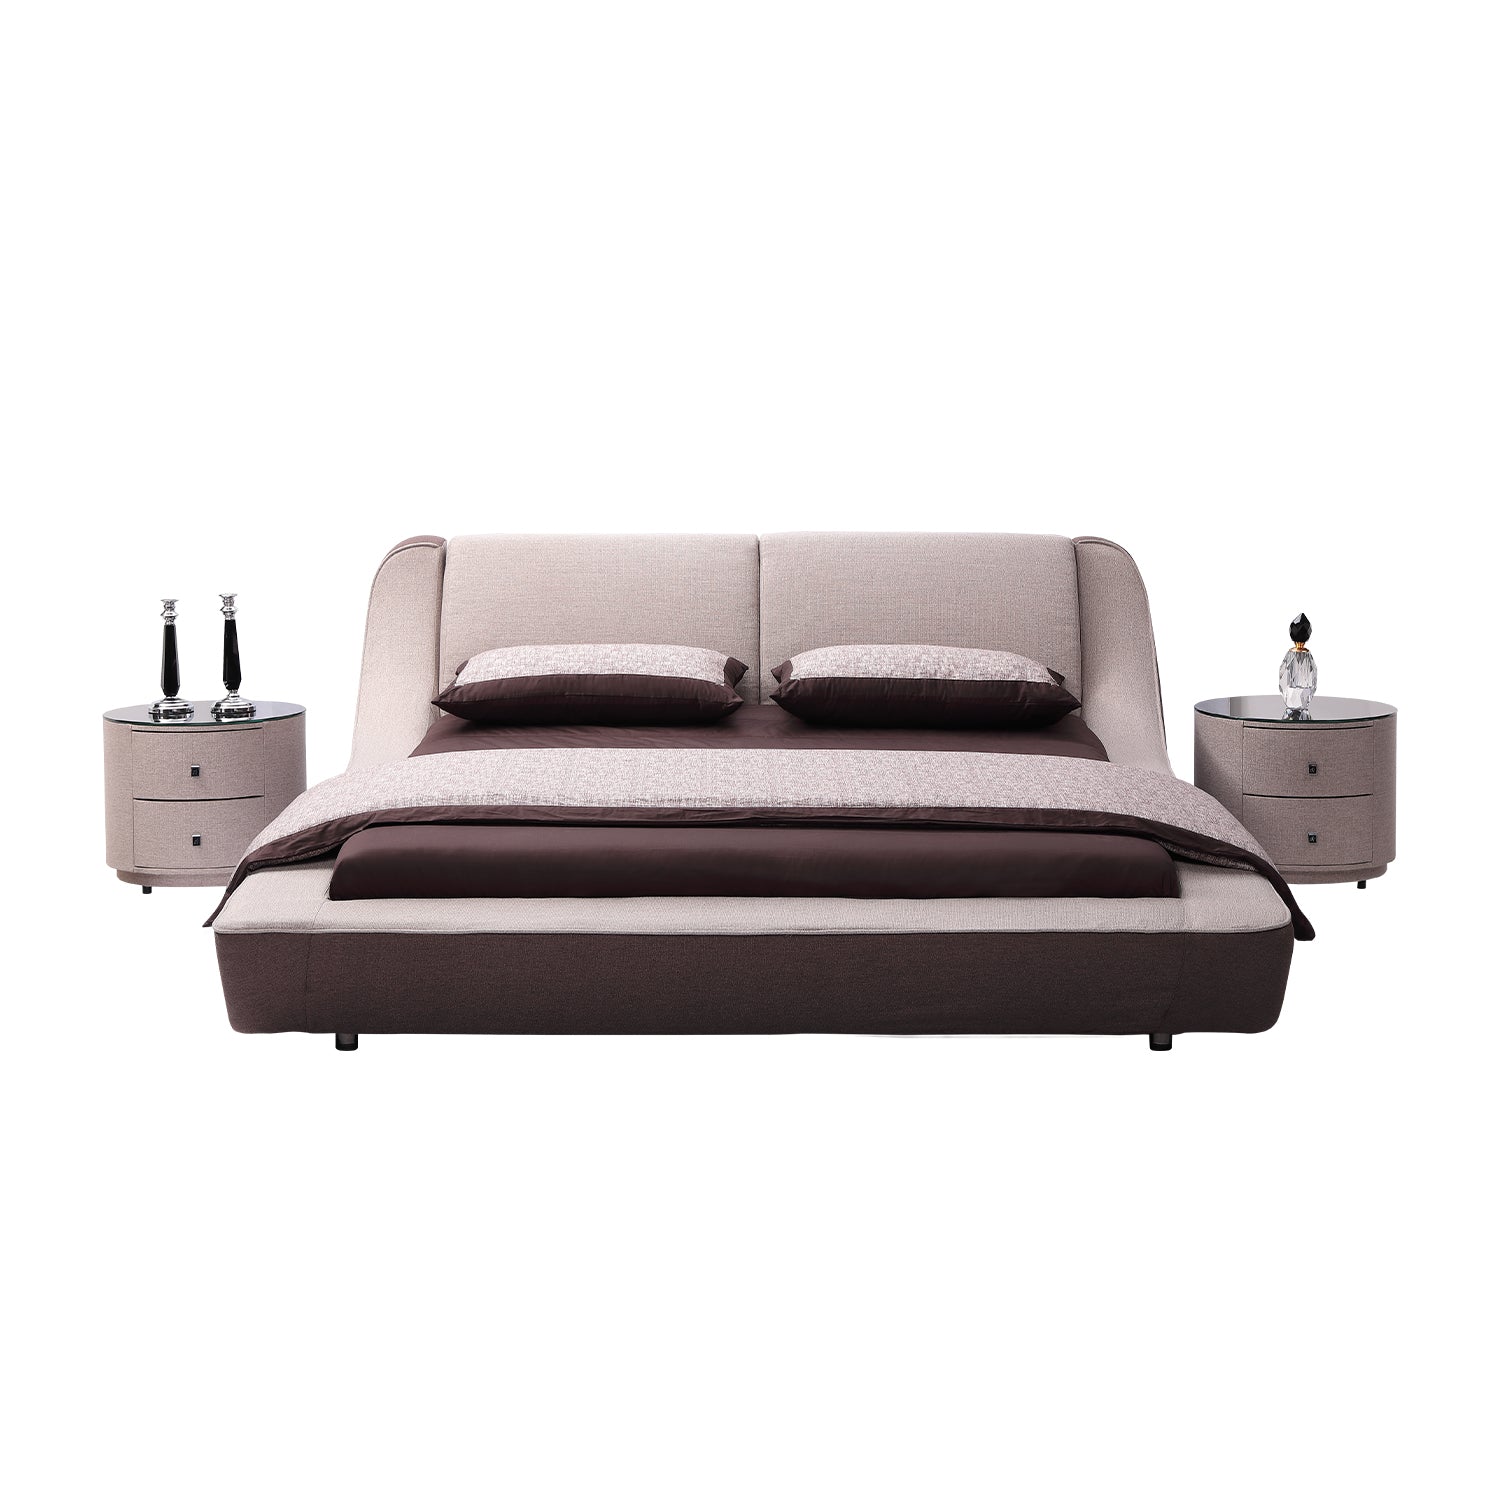 Modern beige and dark brown bed frame with matching fabric headboard and nightstands. Includes pillows and blanket. DeRUCCI high-quality bedroom furniture.